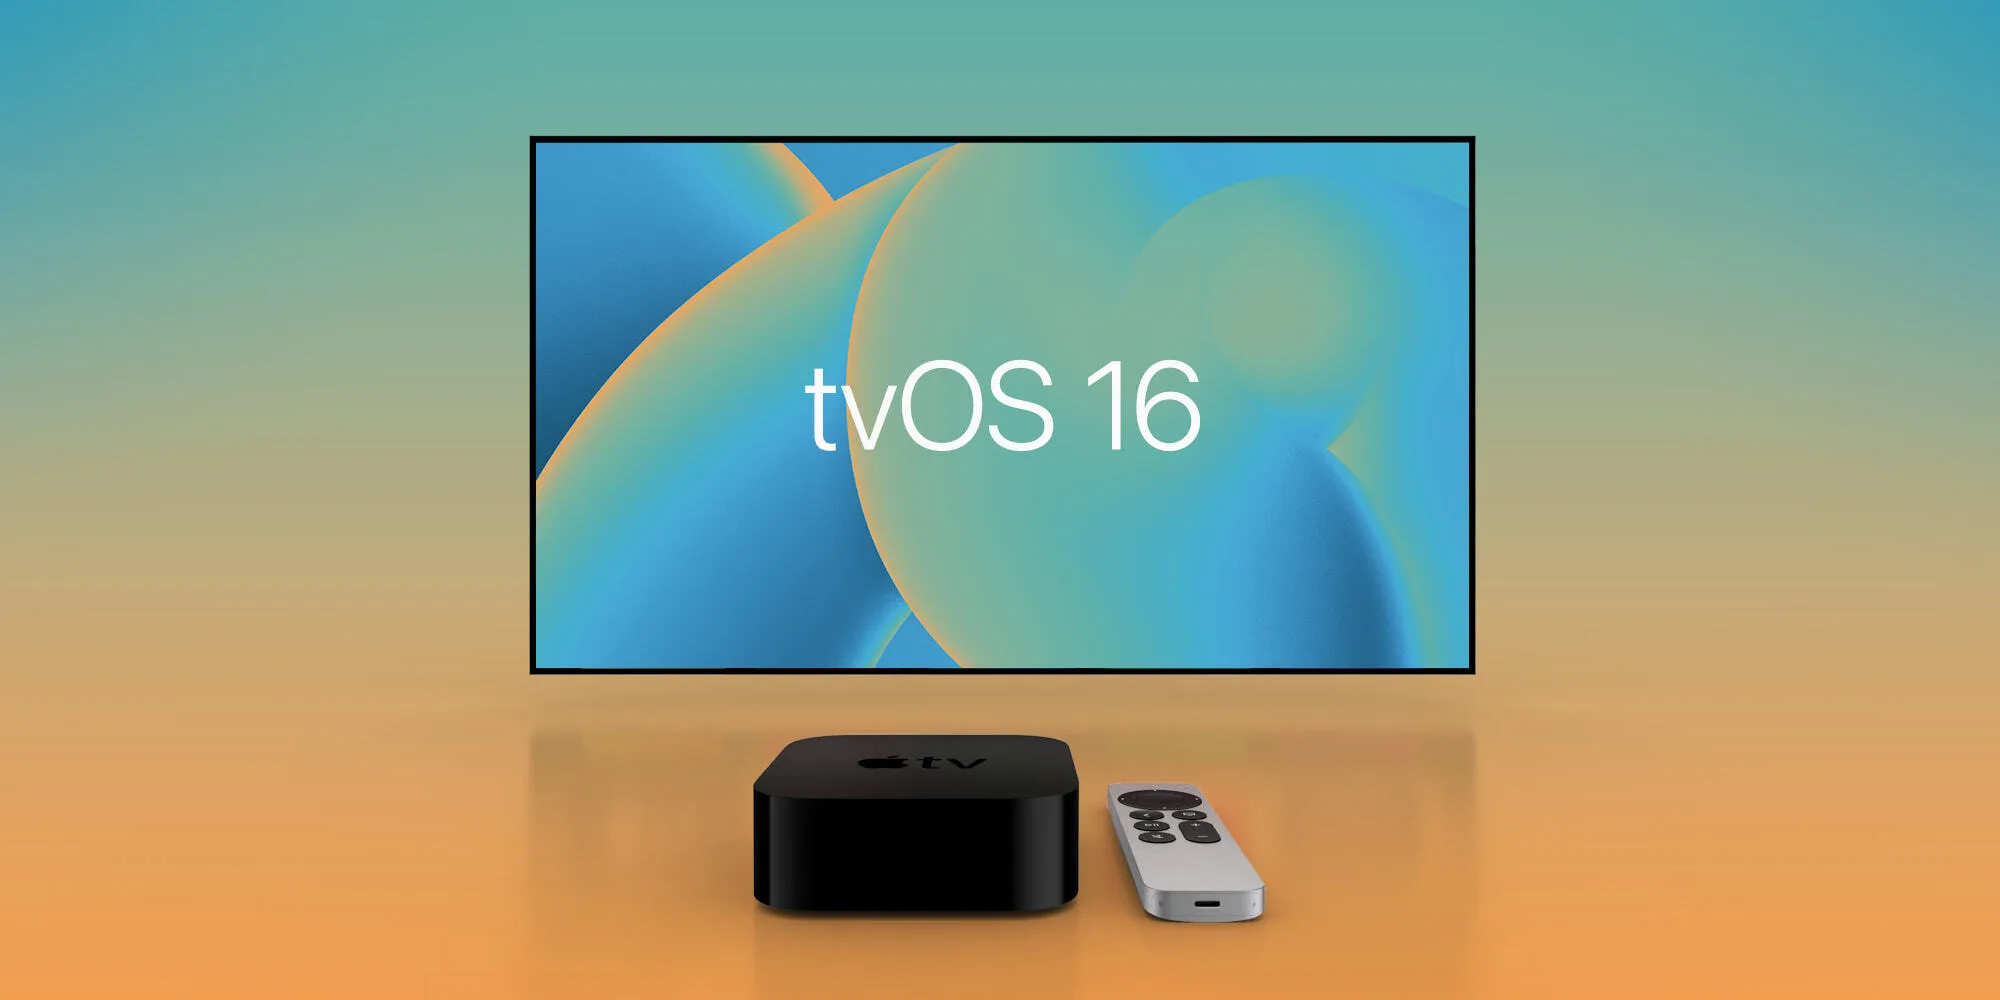 tvOS 16 is now accessible to Apple TV and HomePod clients, here are the new features